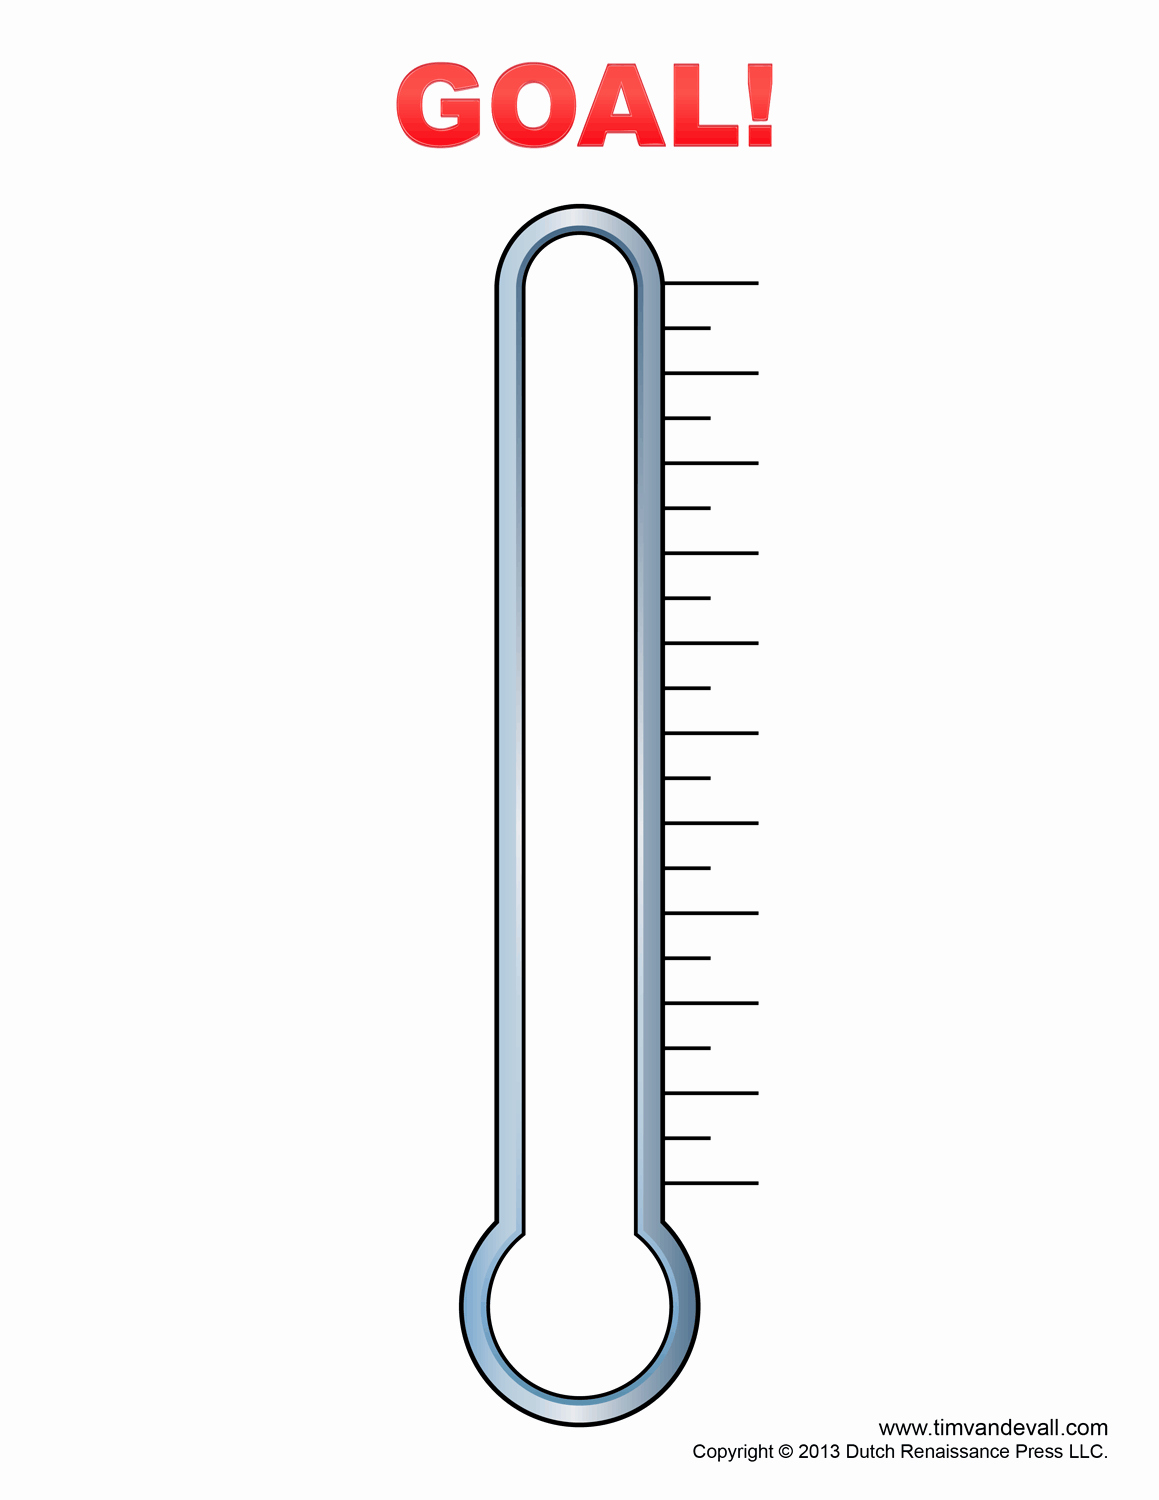 Blank thermometer Image Unique Free Blank thermometer Download Free Clip Art Free Clip